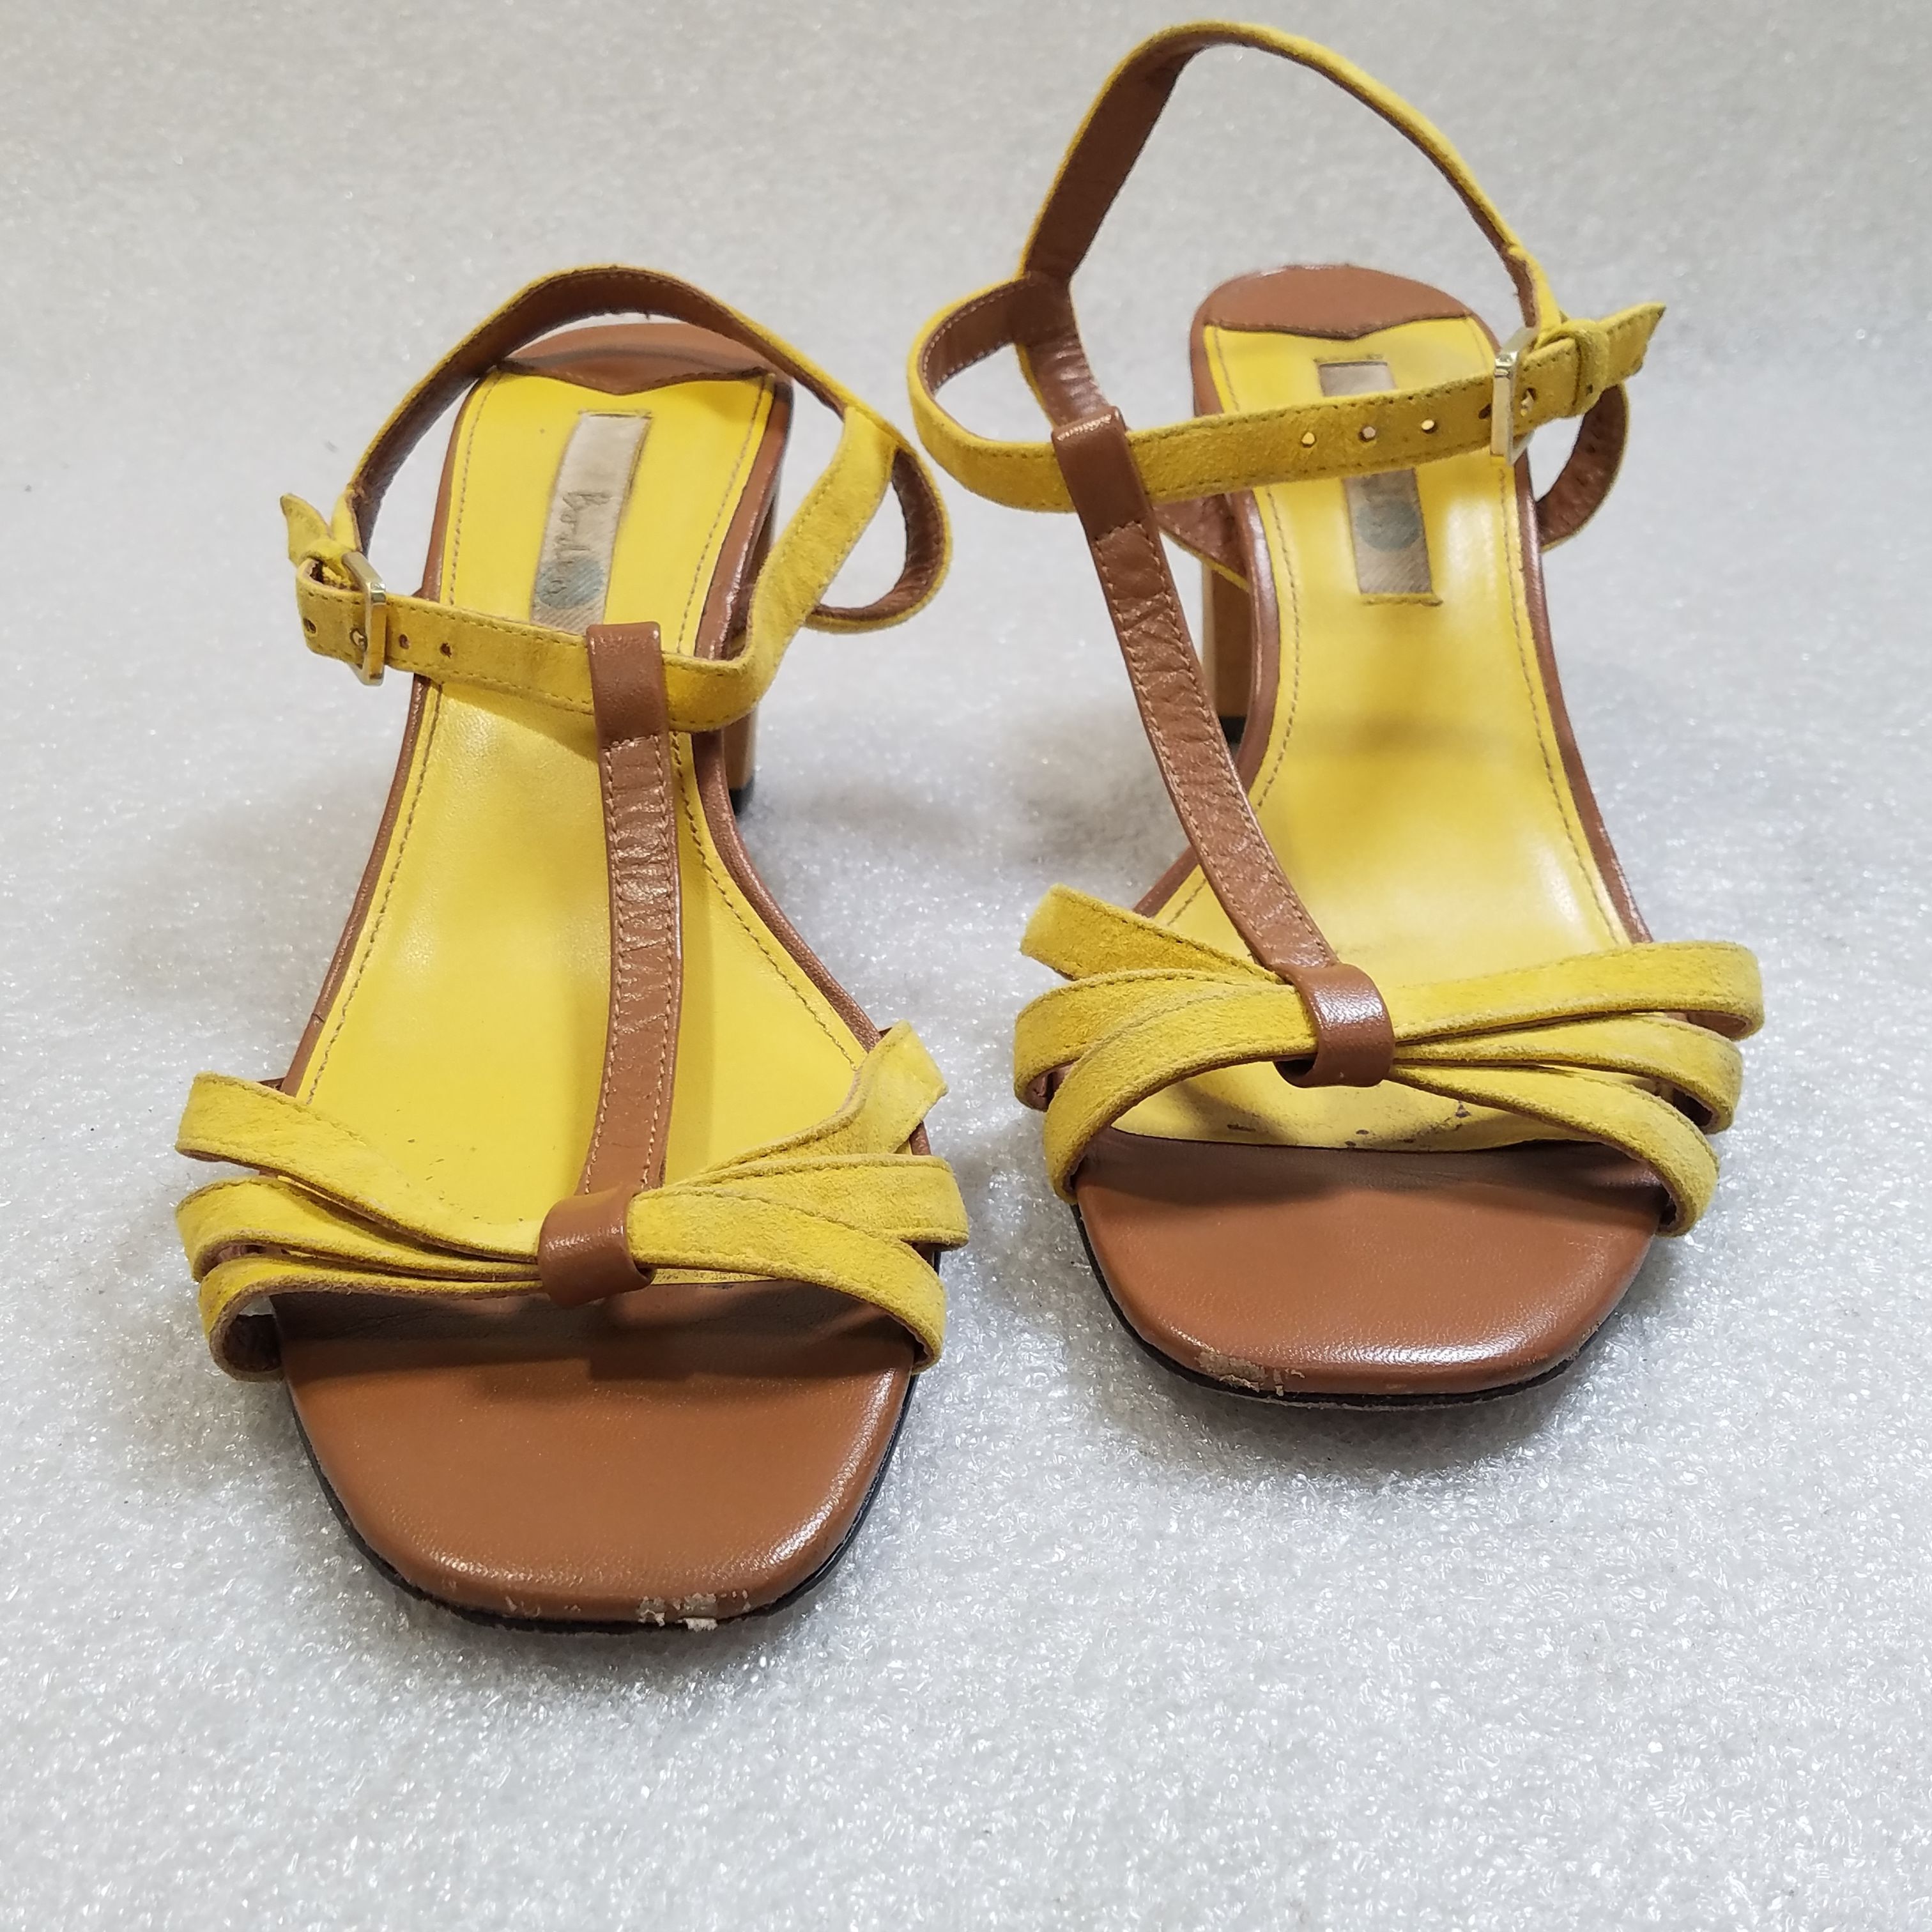 Lib Pointed Toe Bowknot Stiletto Heels Classic Evening Part Dress Pumps -  Yellow in Sexy Heels & Platforms - $72.08